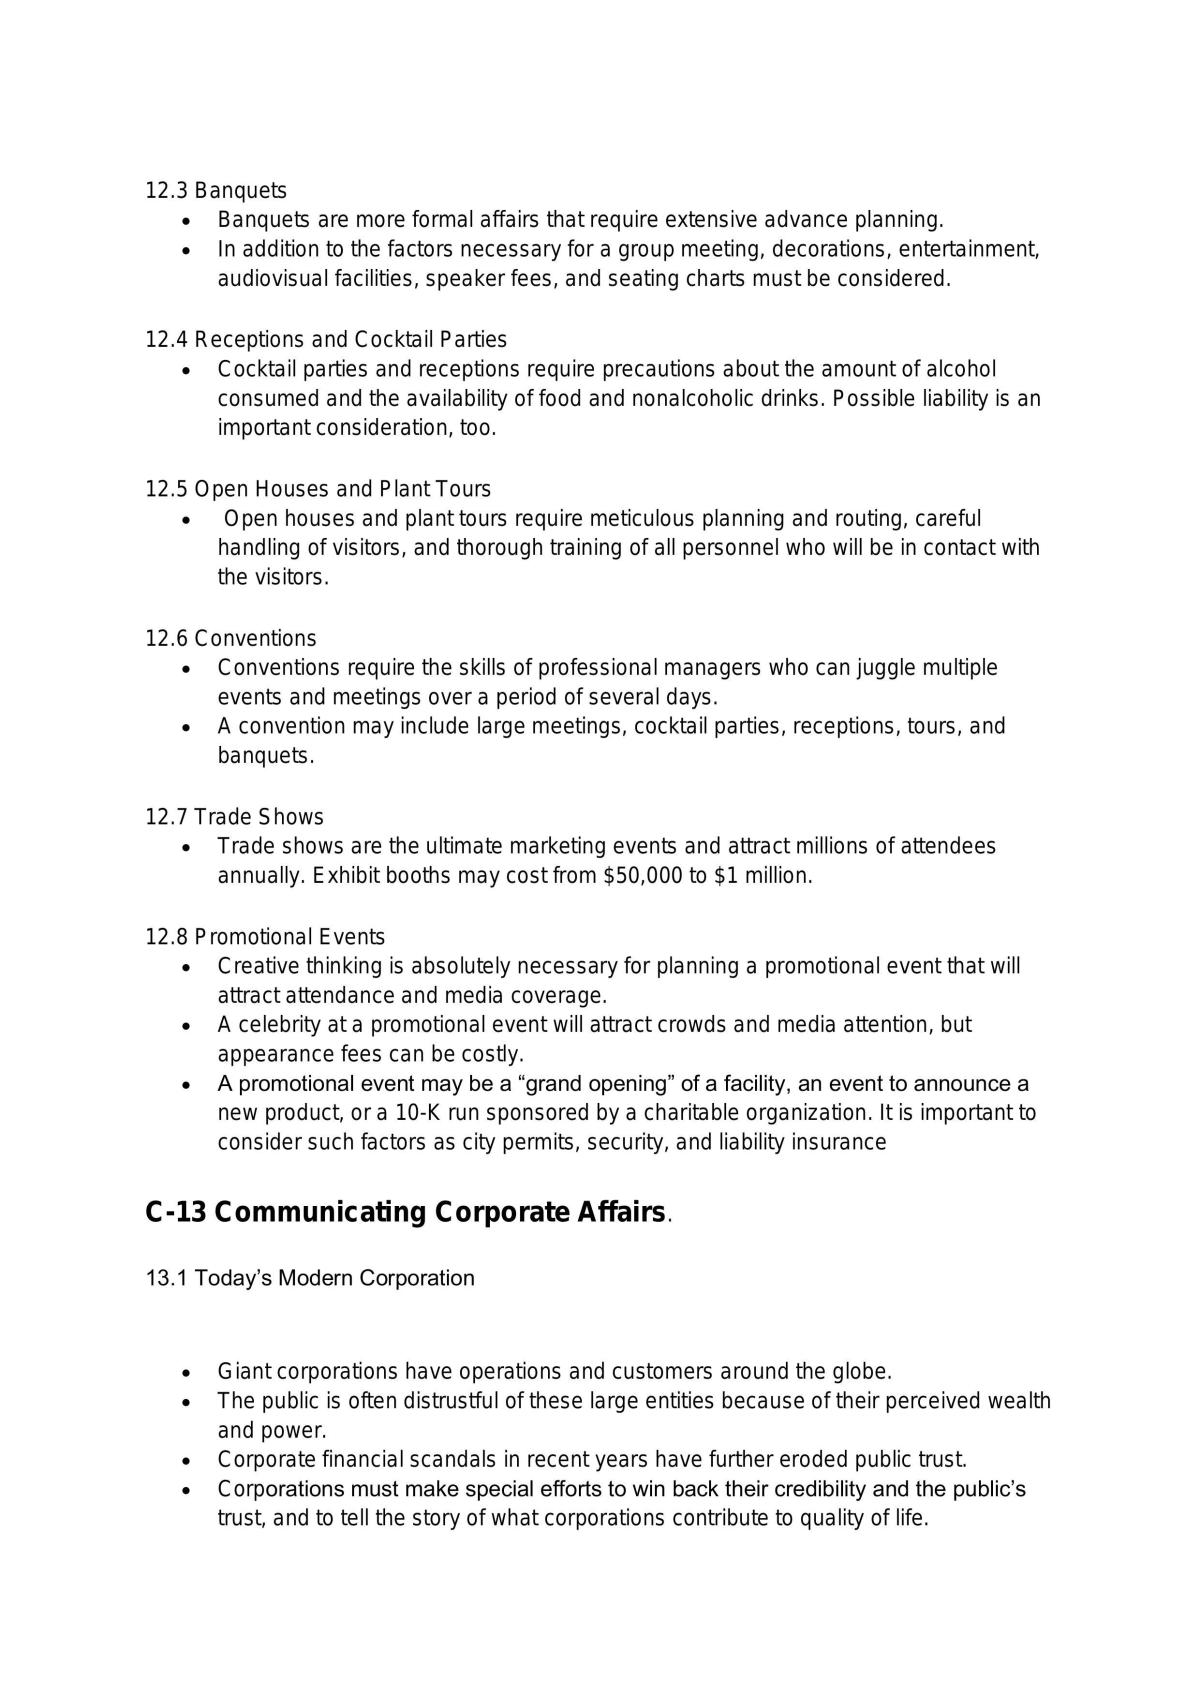 Strategies and Tactics of Public Relations Notes  - Page 16